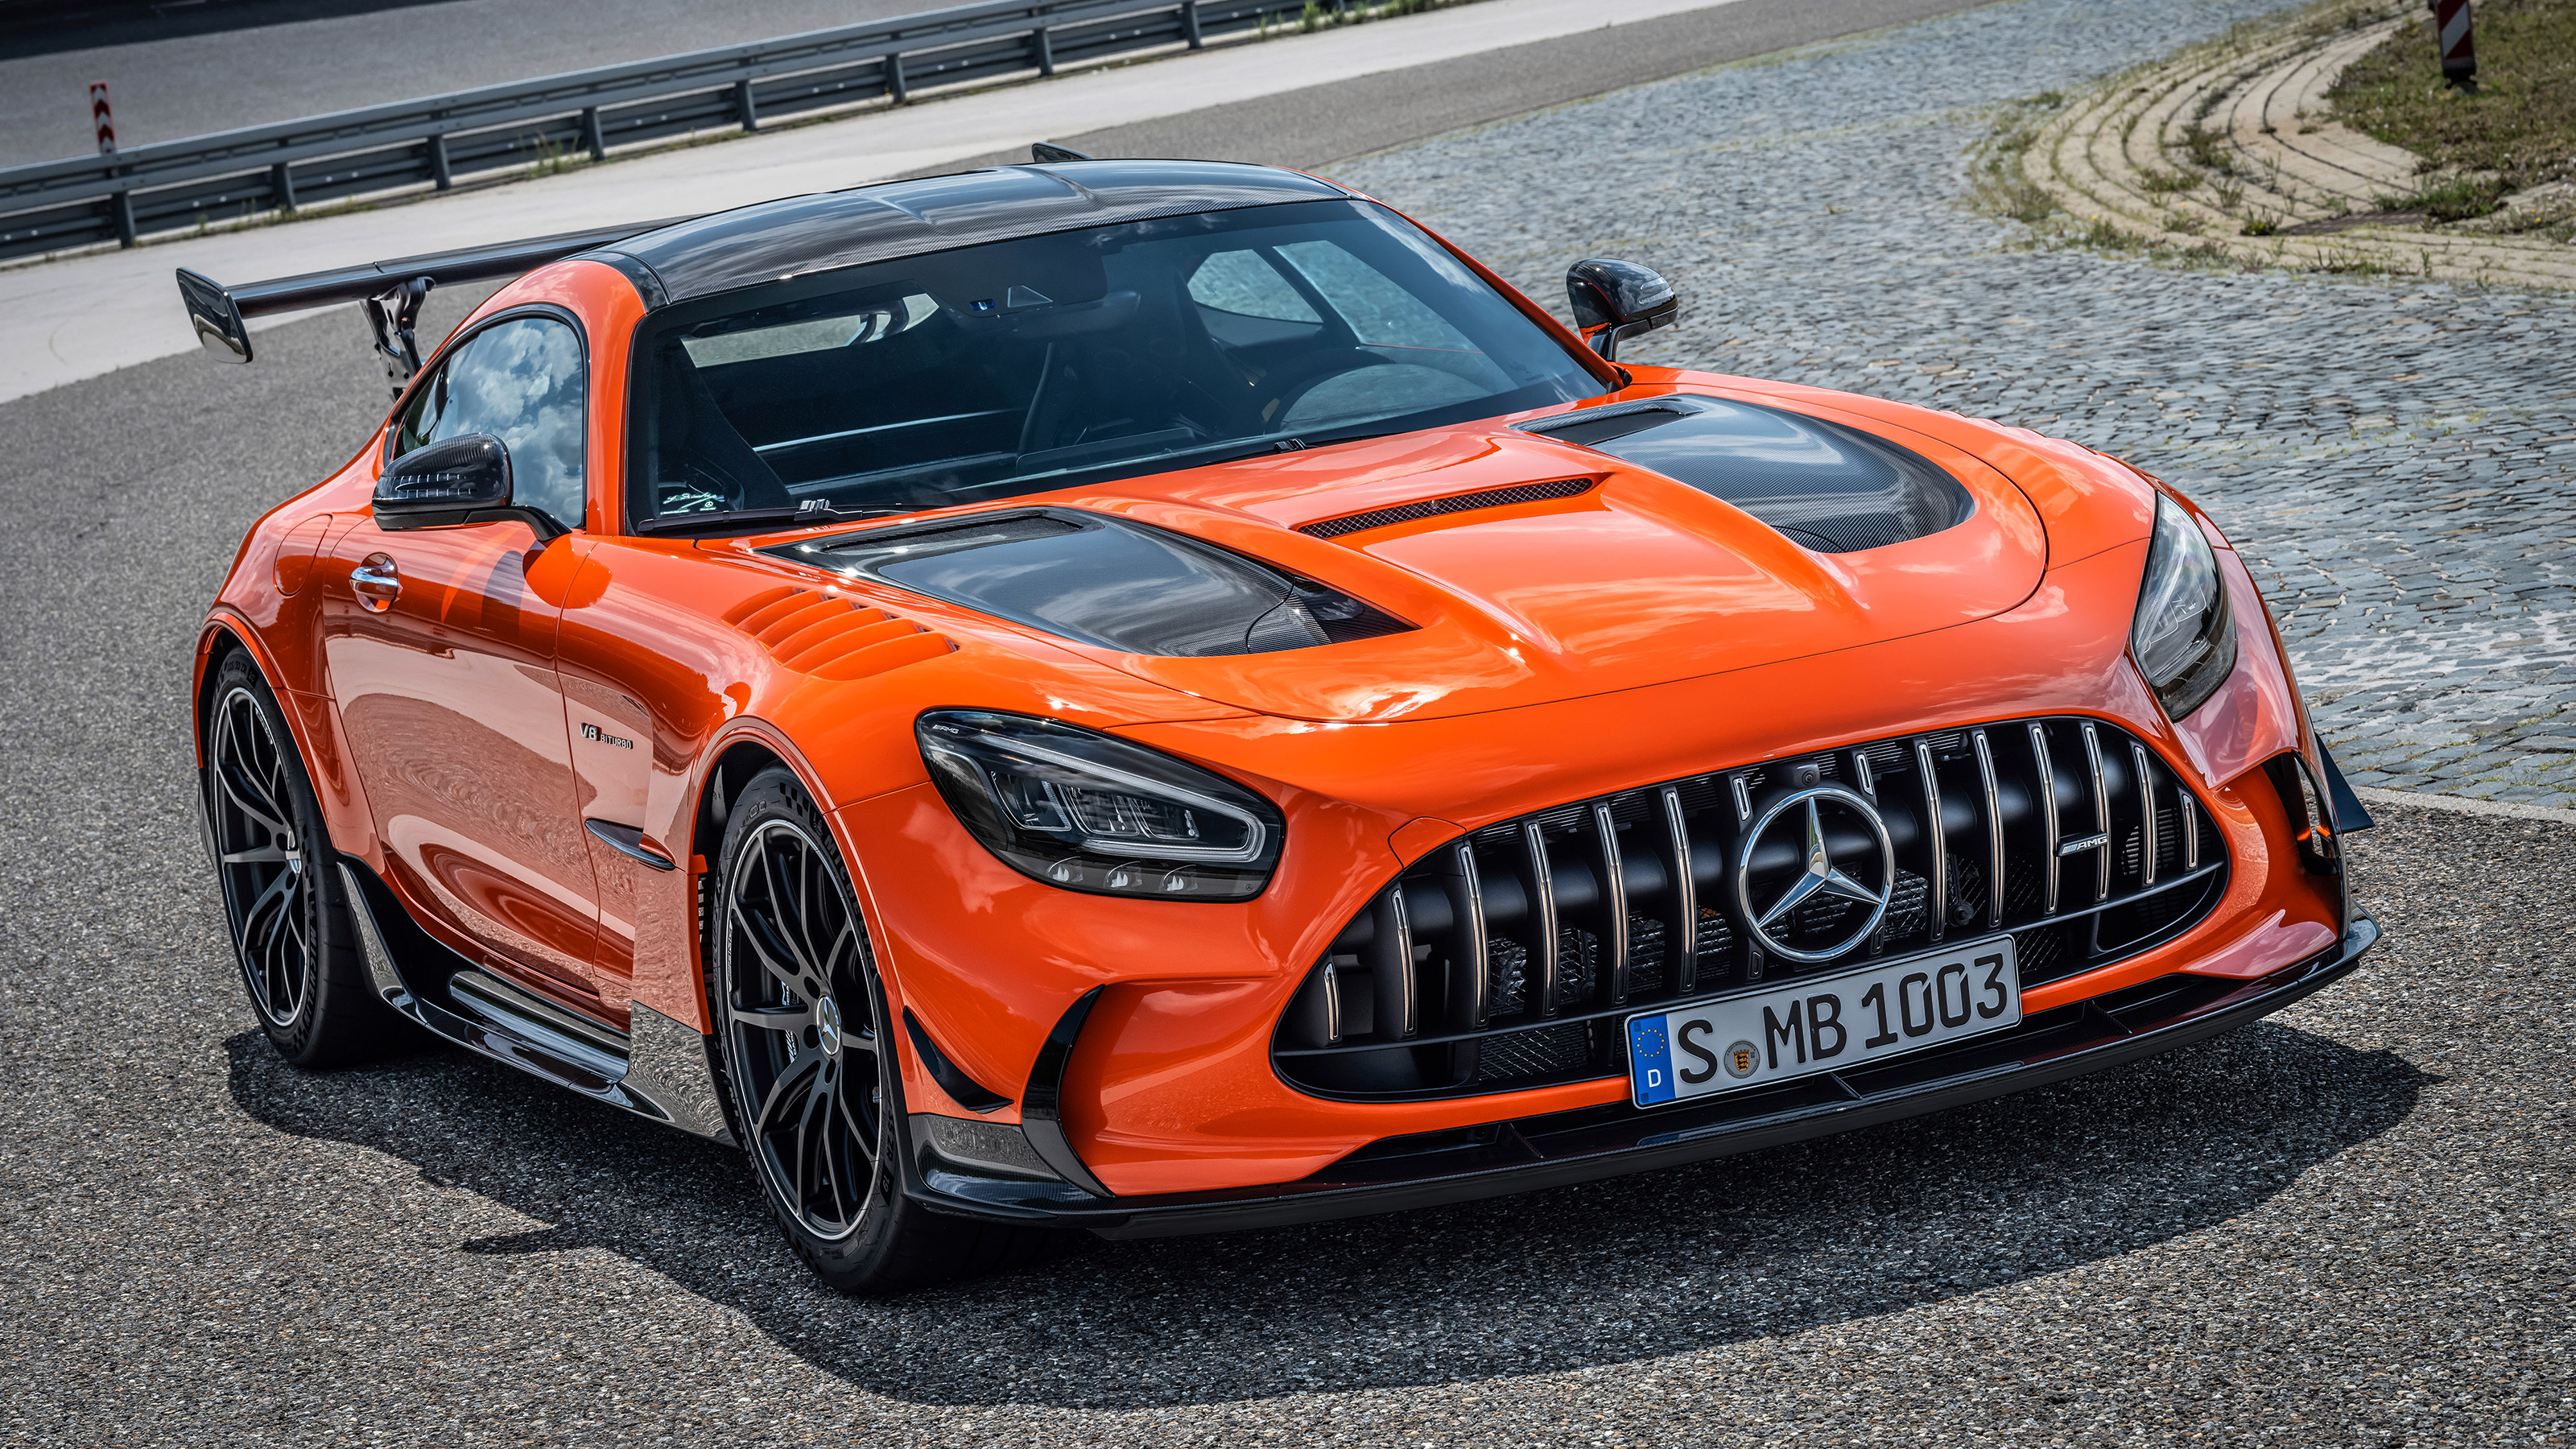 Review: The Mercedes-AMG GT Black Series Is the Finest Yet in the